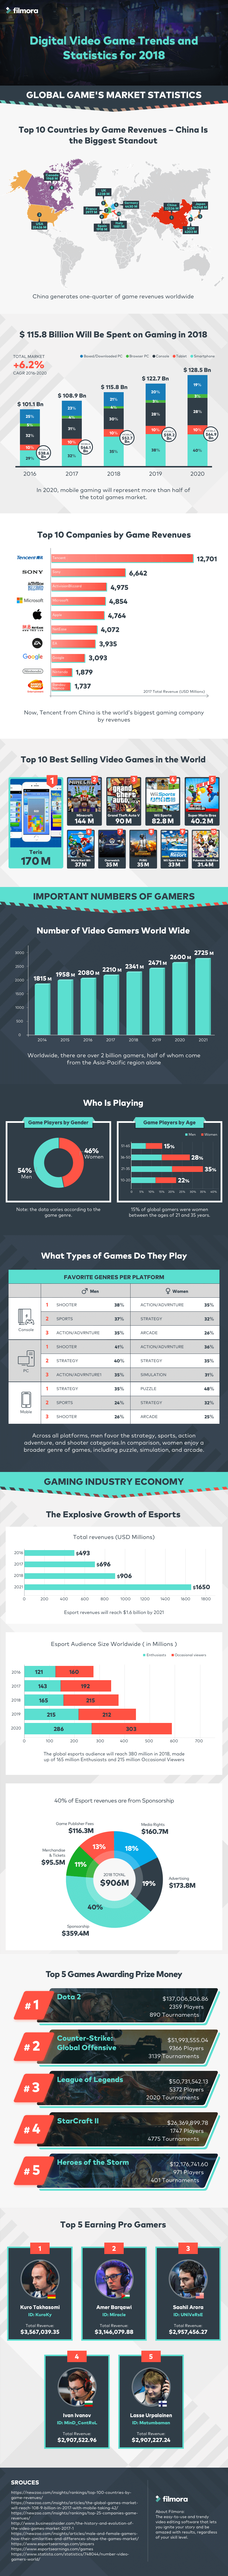 infographic video game industry statistics